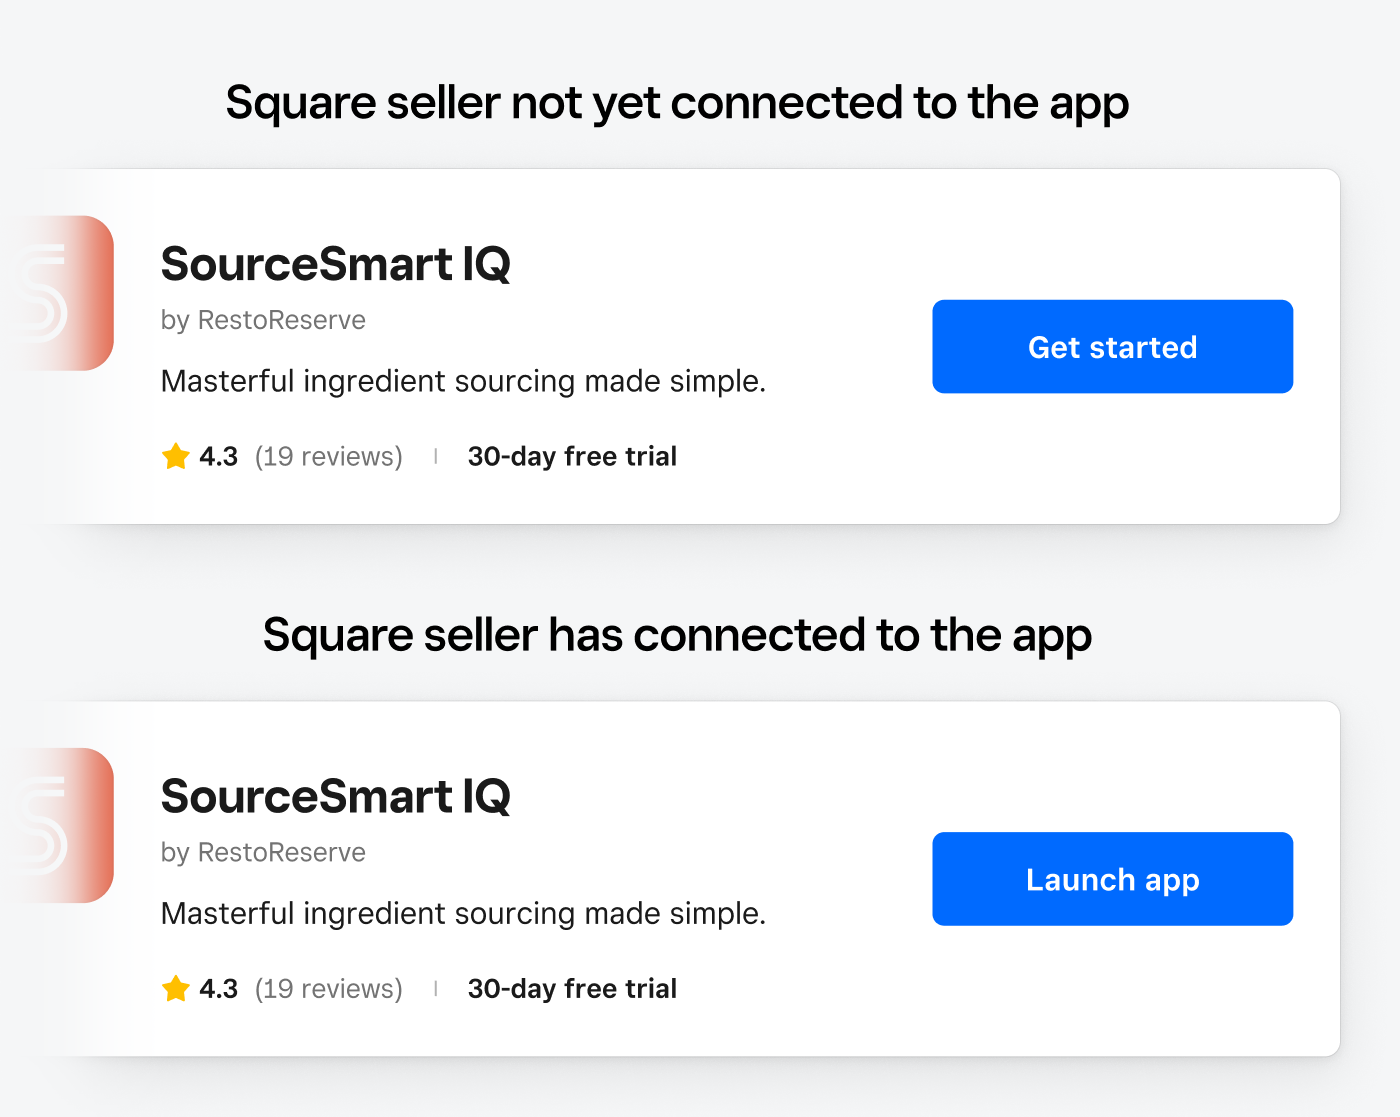 An image showing two versions of the get started prompt for an app marketplace listing